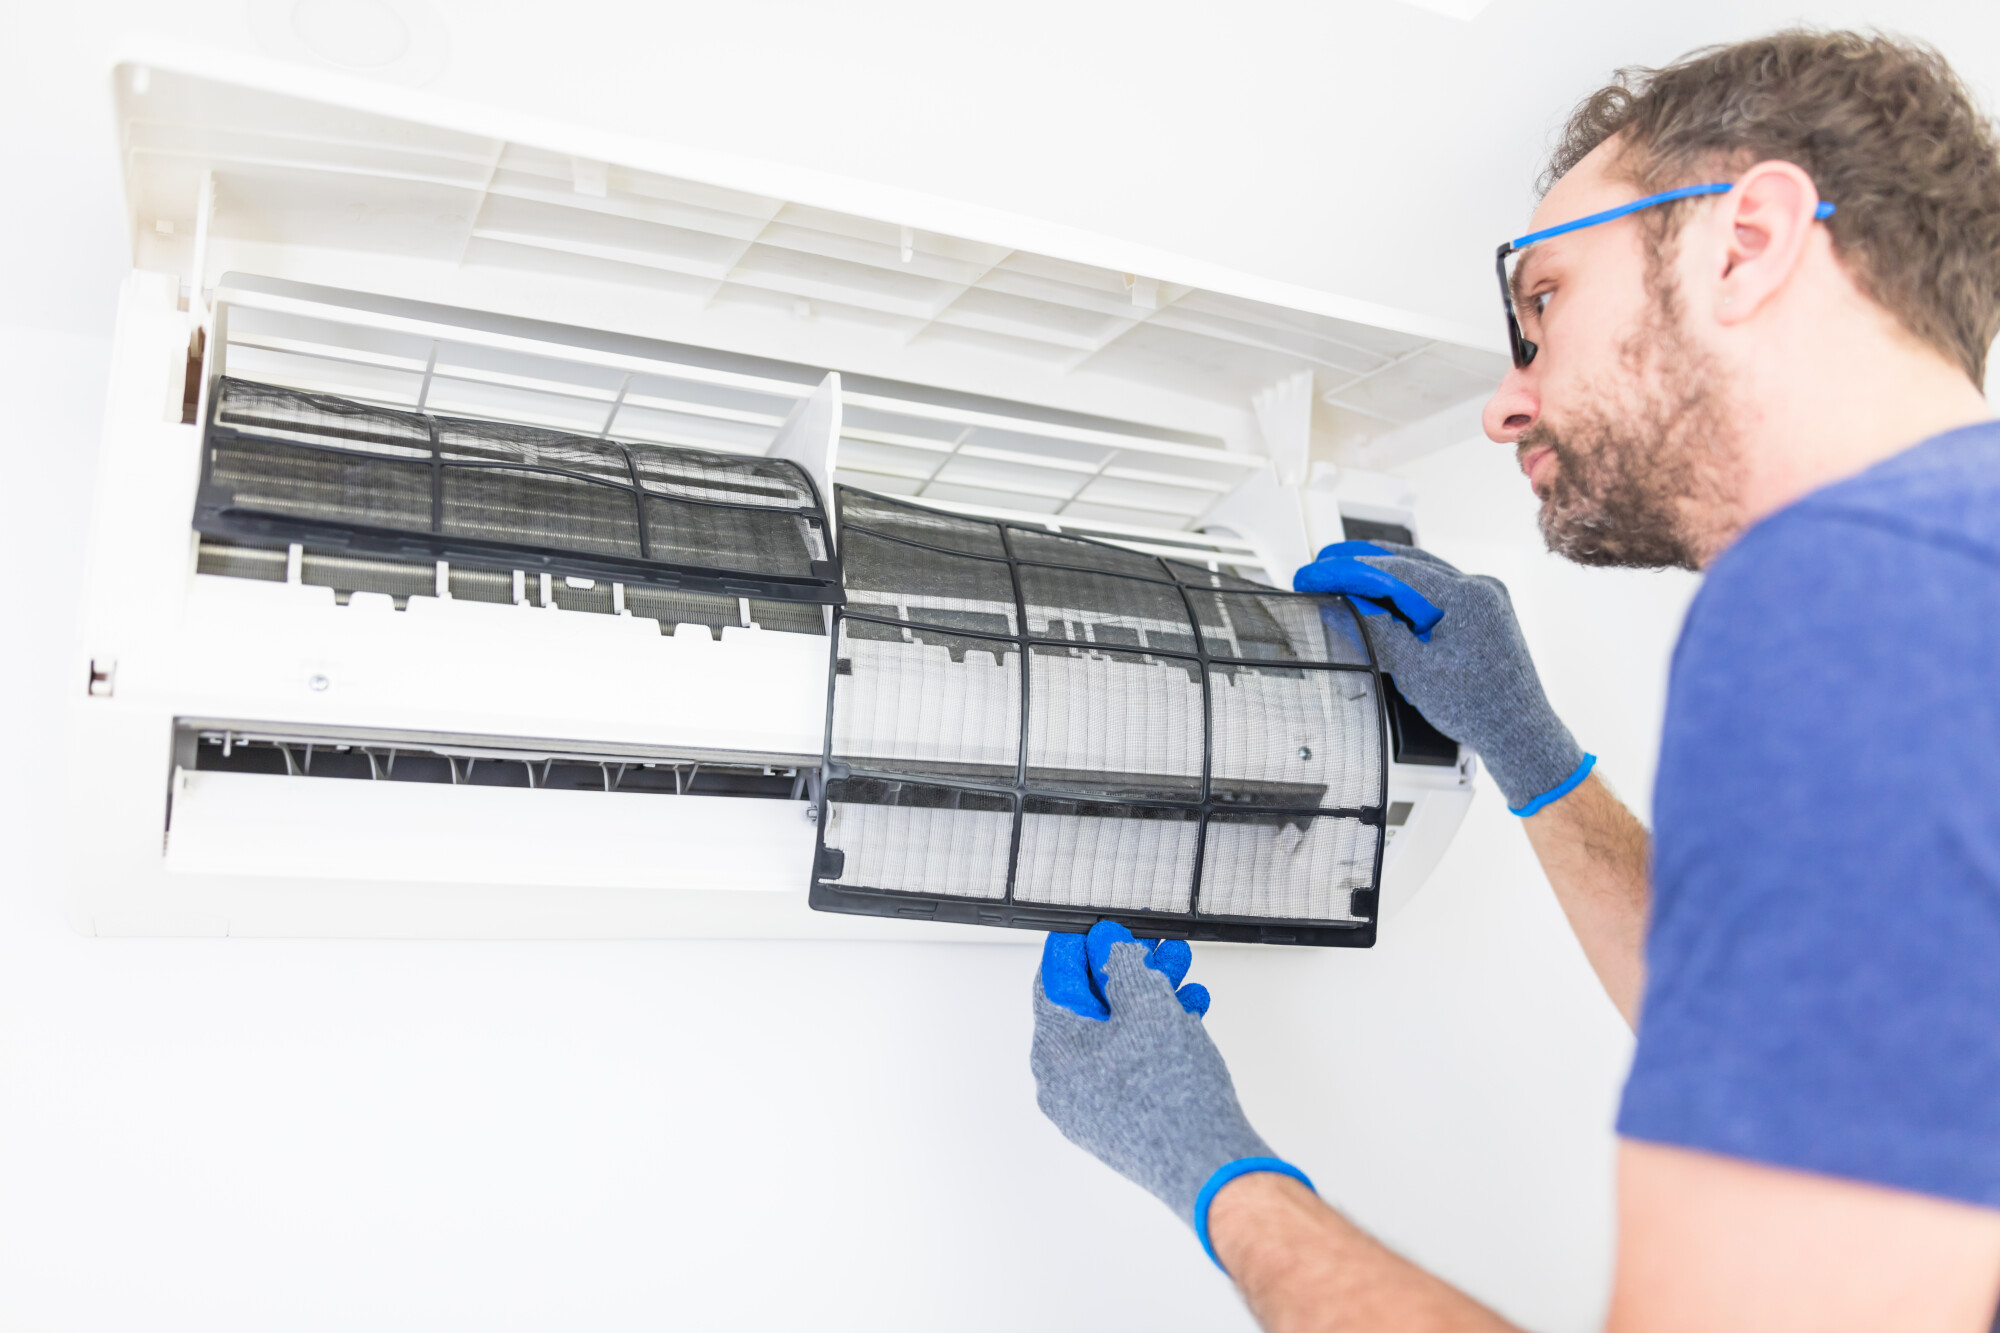 Do you want to know how to clean an ac filter like a pro? Have you ever done it before? Read on to learn how to do it the right way